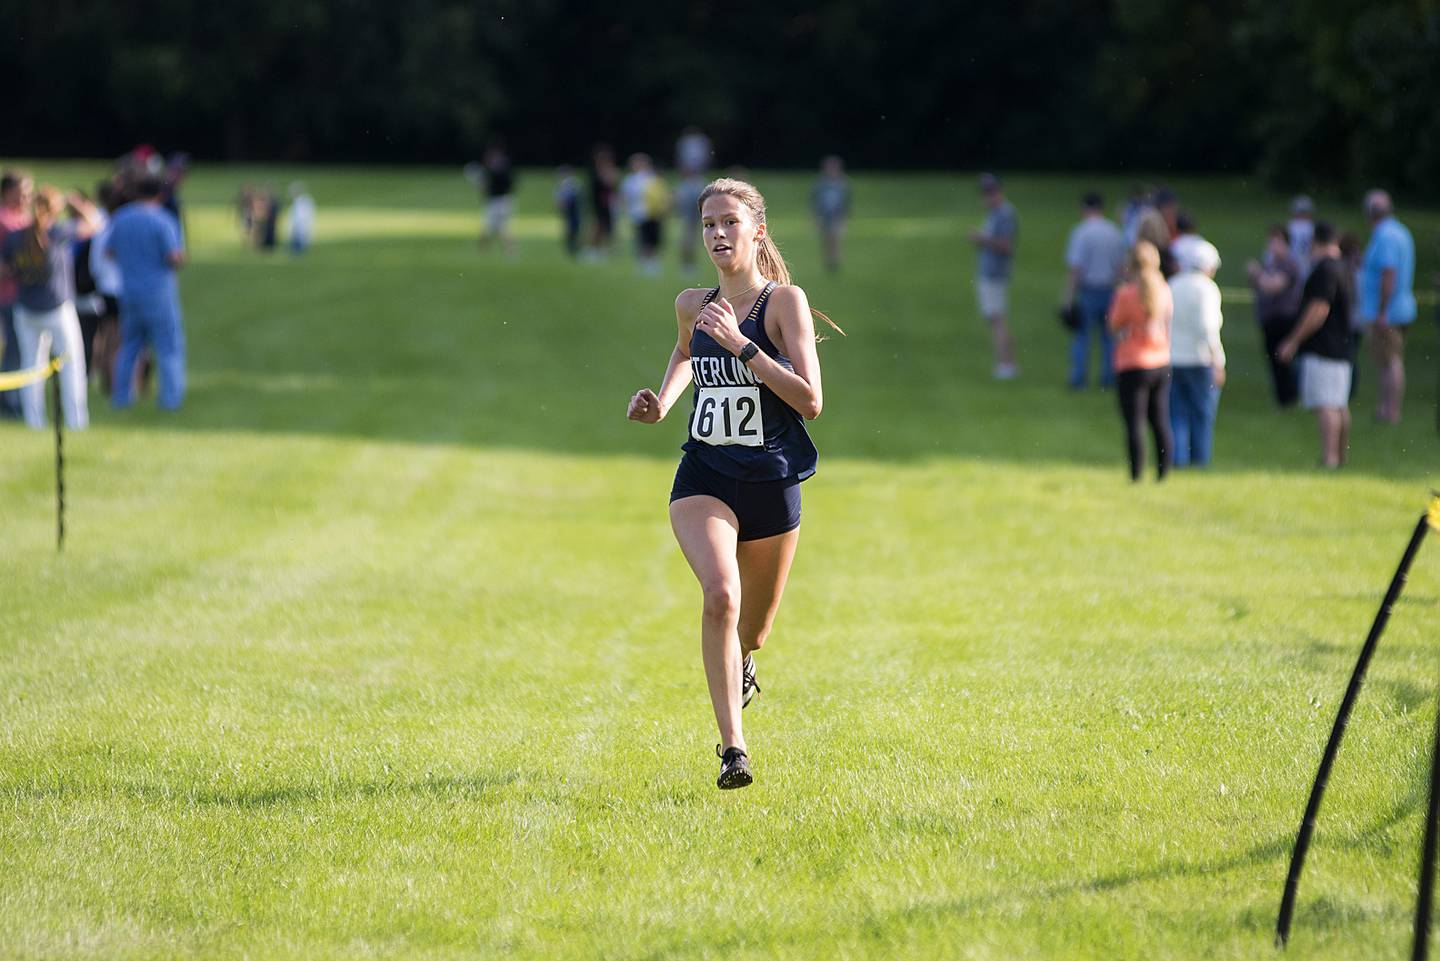 Riley Wade of Sterling cruises to a win in the girl's race at the Twin Cities cross country meet in Sterling, Sept. 13, 2022.